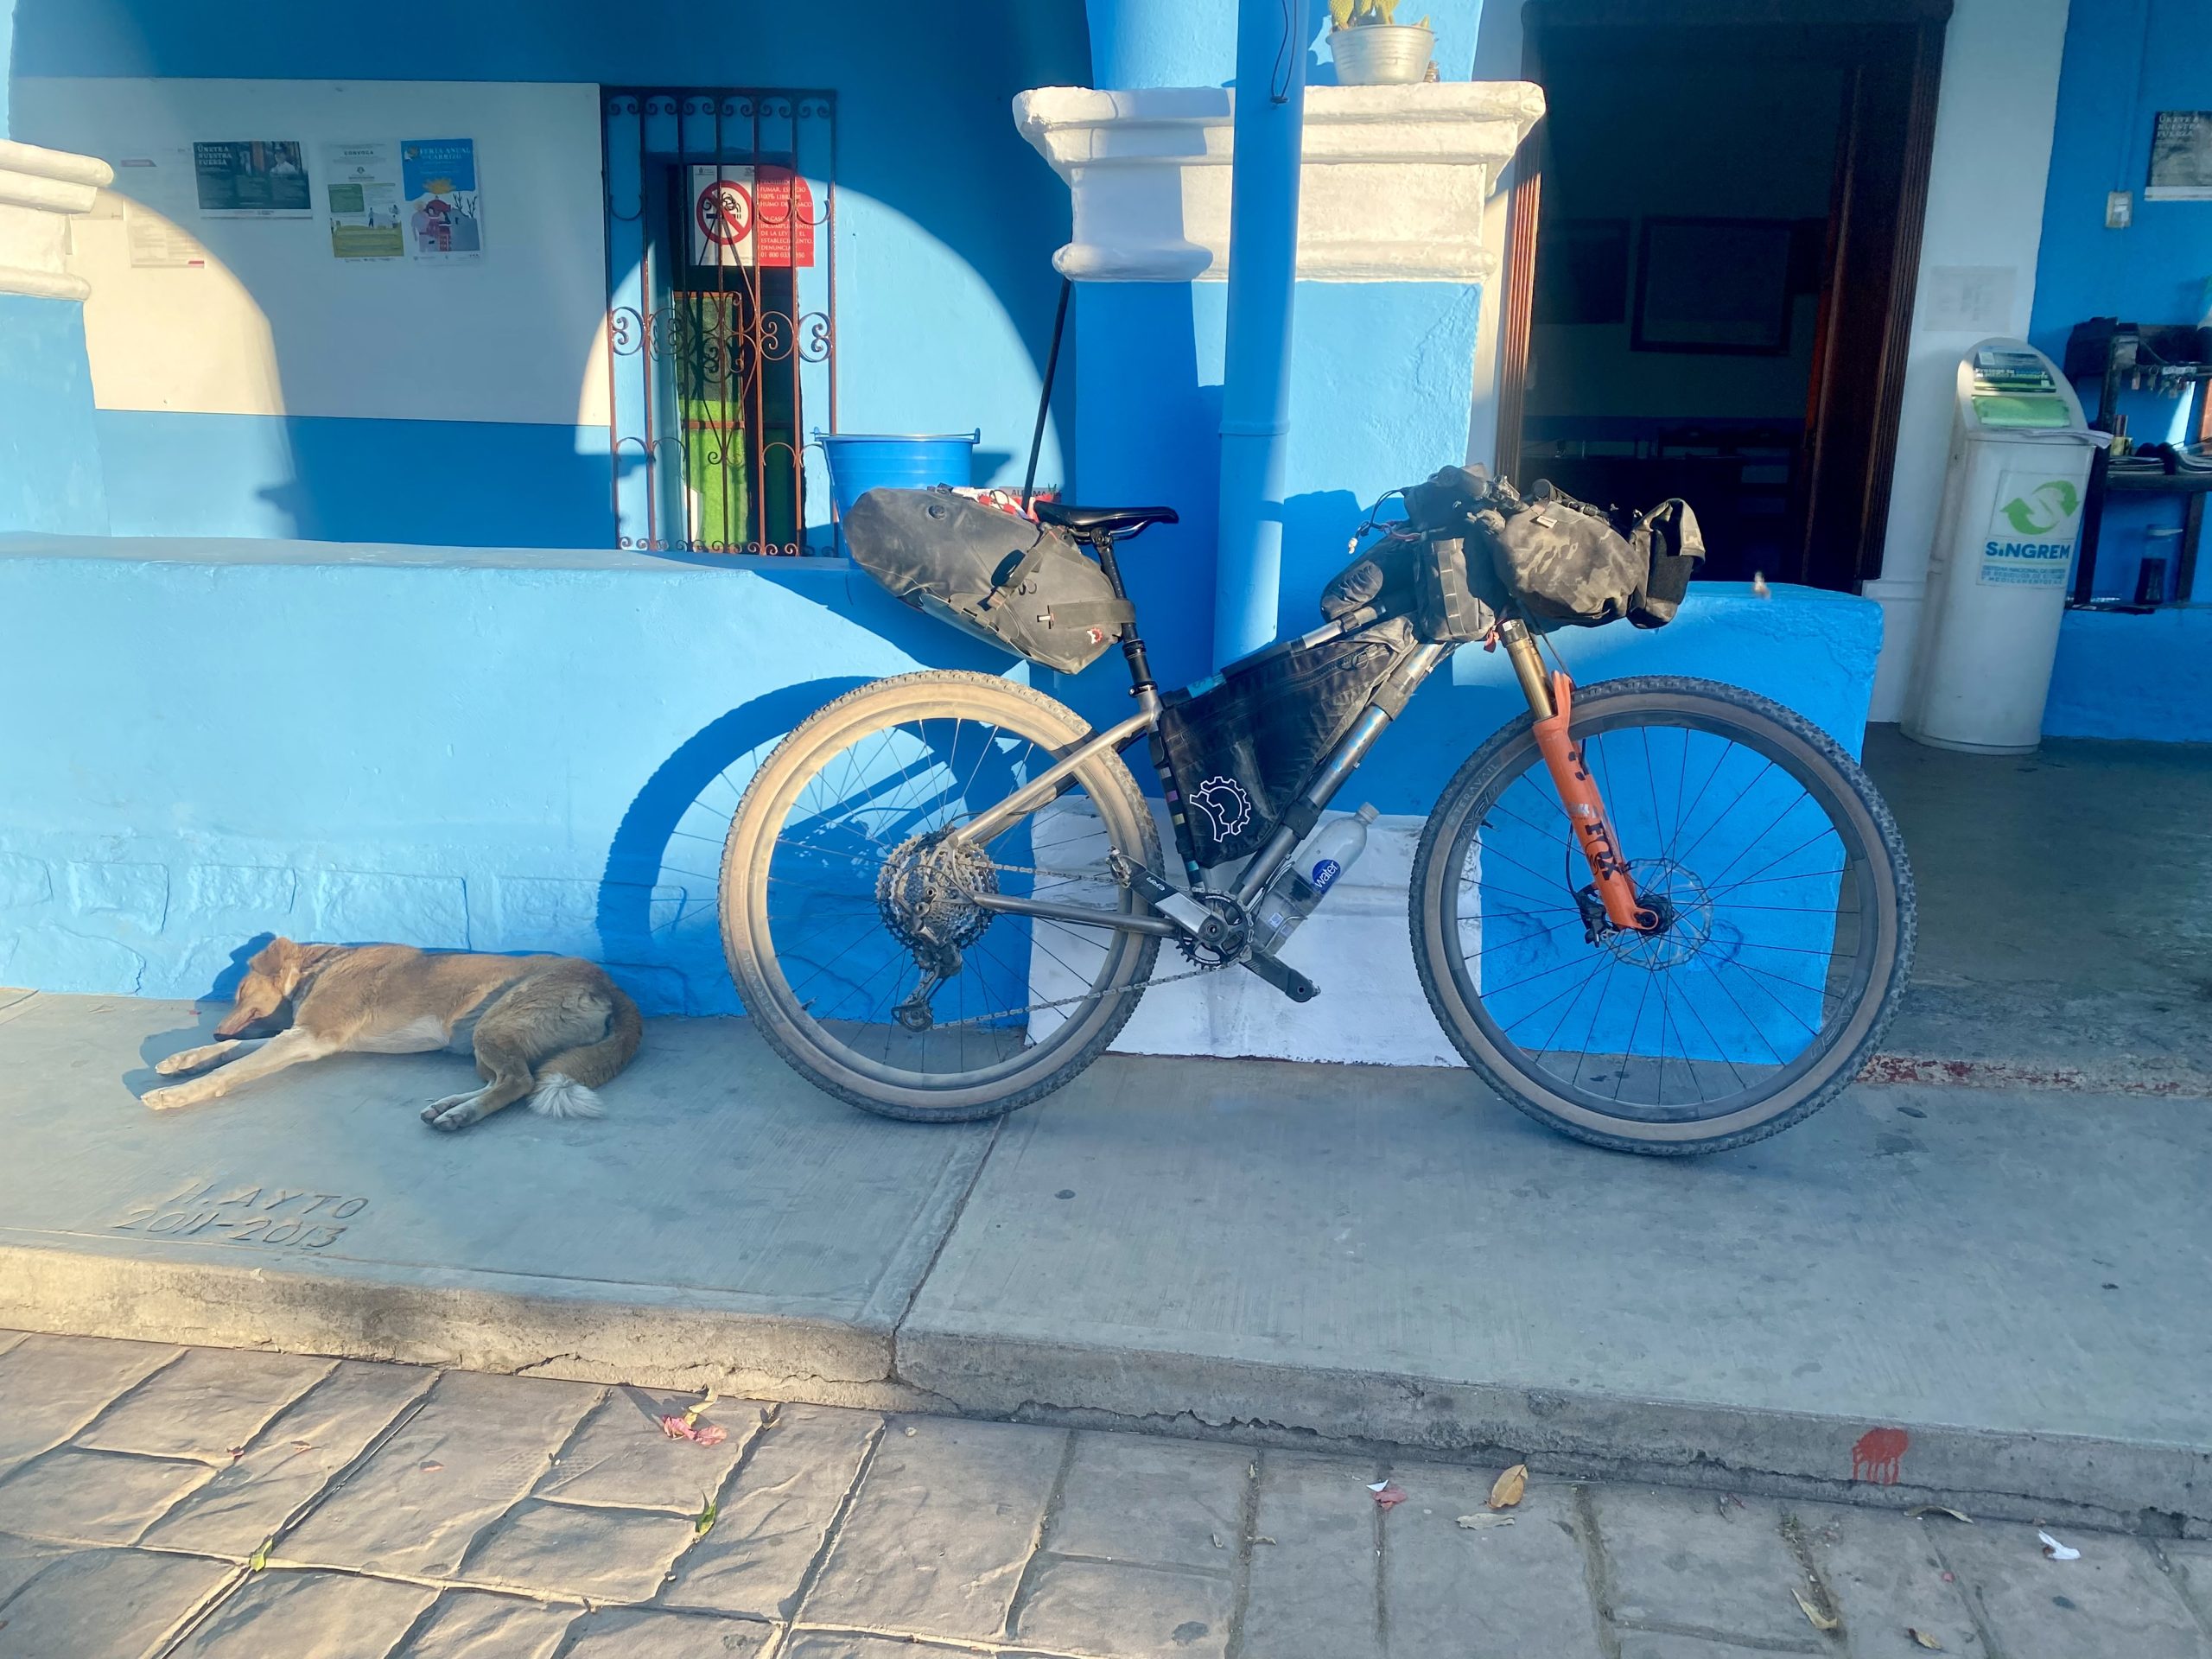 A mountain bike loaded for bikepacking leans against a building's bright blue retaining wall in the low light of a setting sun. A dog lays on the sidewalk next to the bike, fast asleep in a fading ray of sunlight.